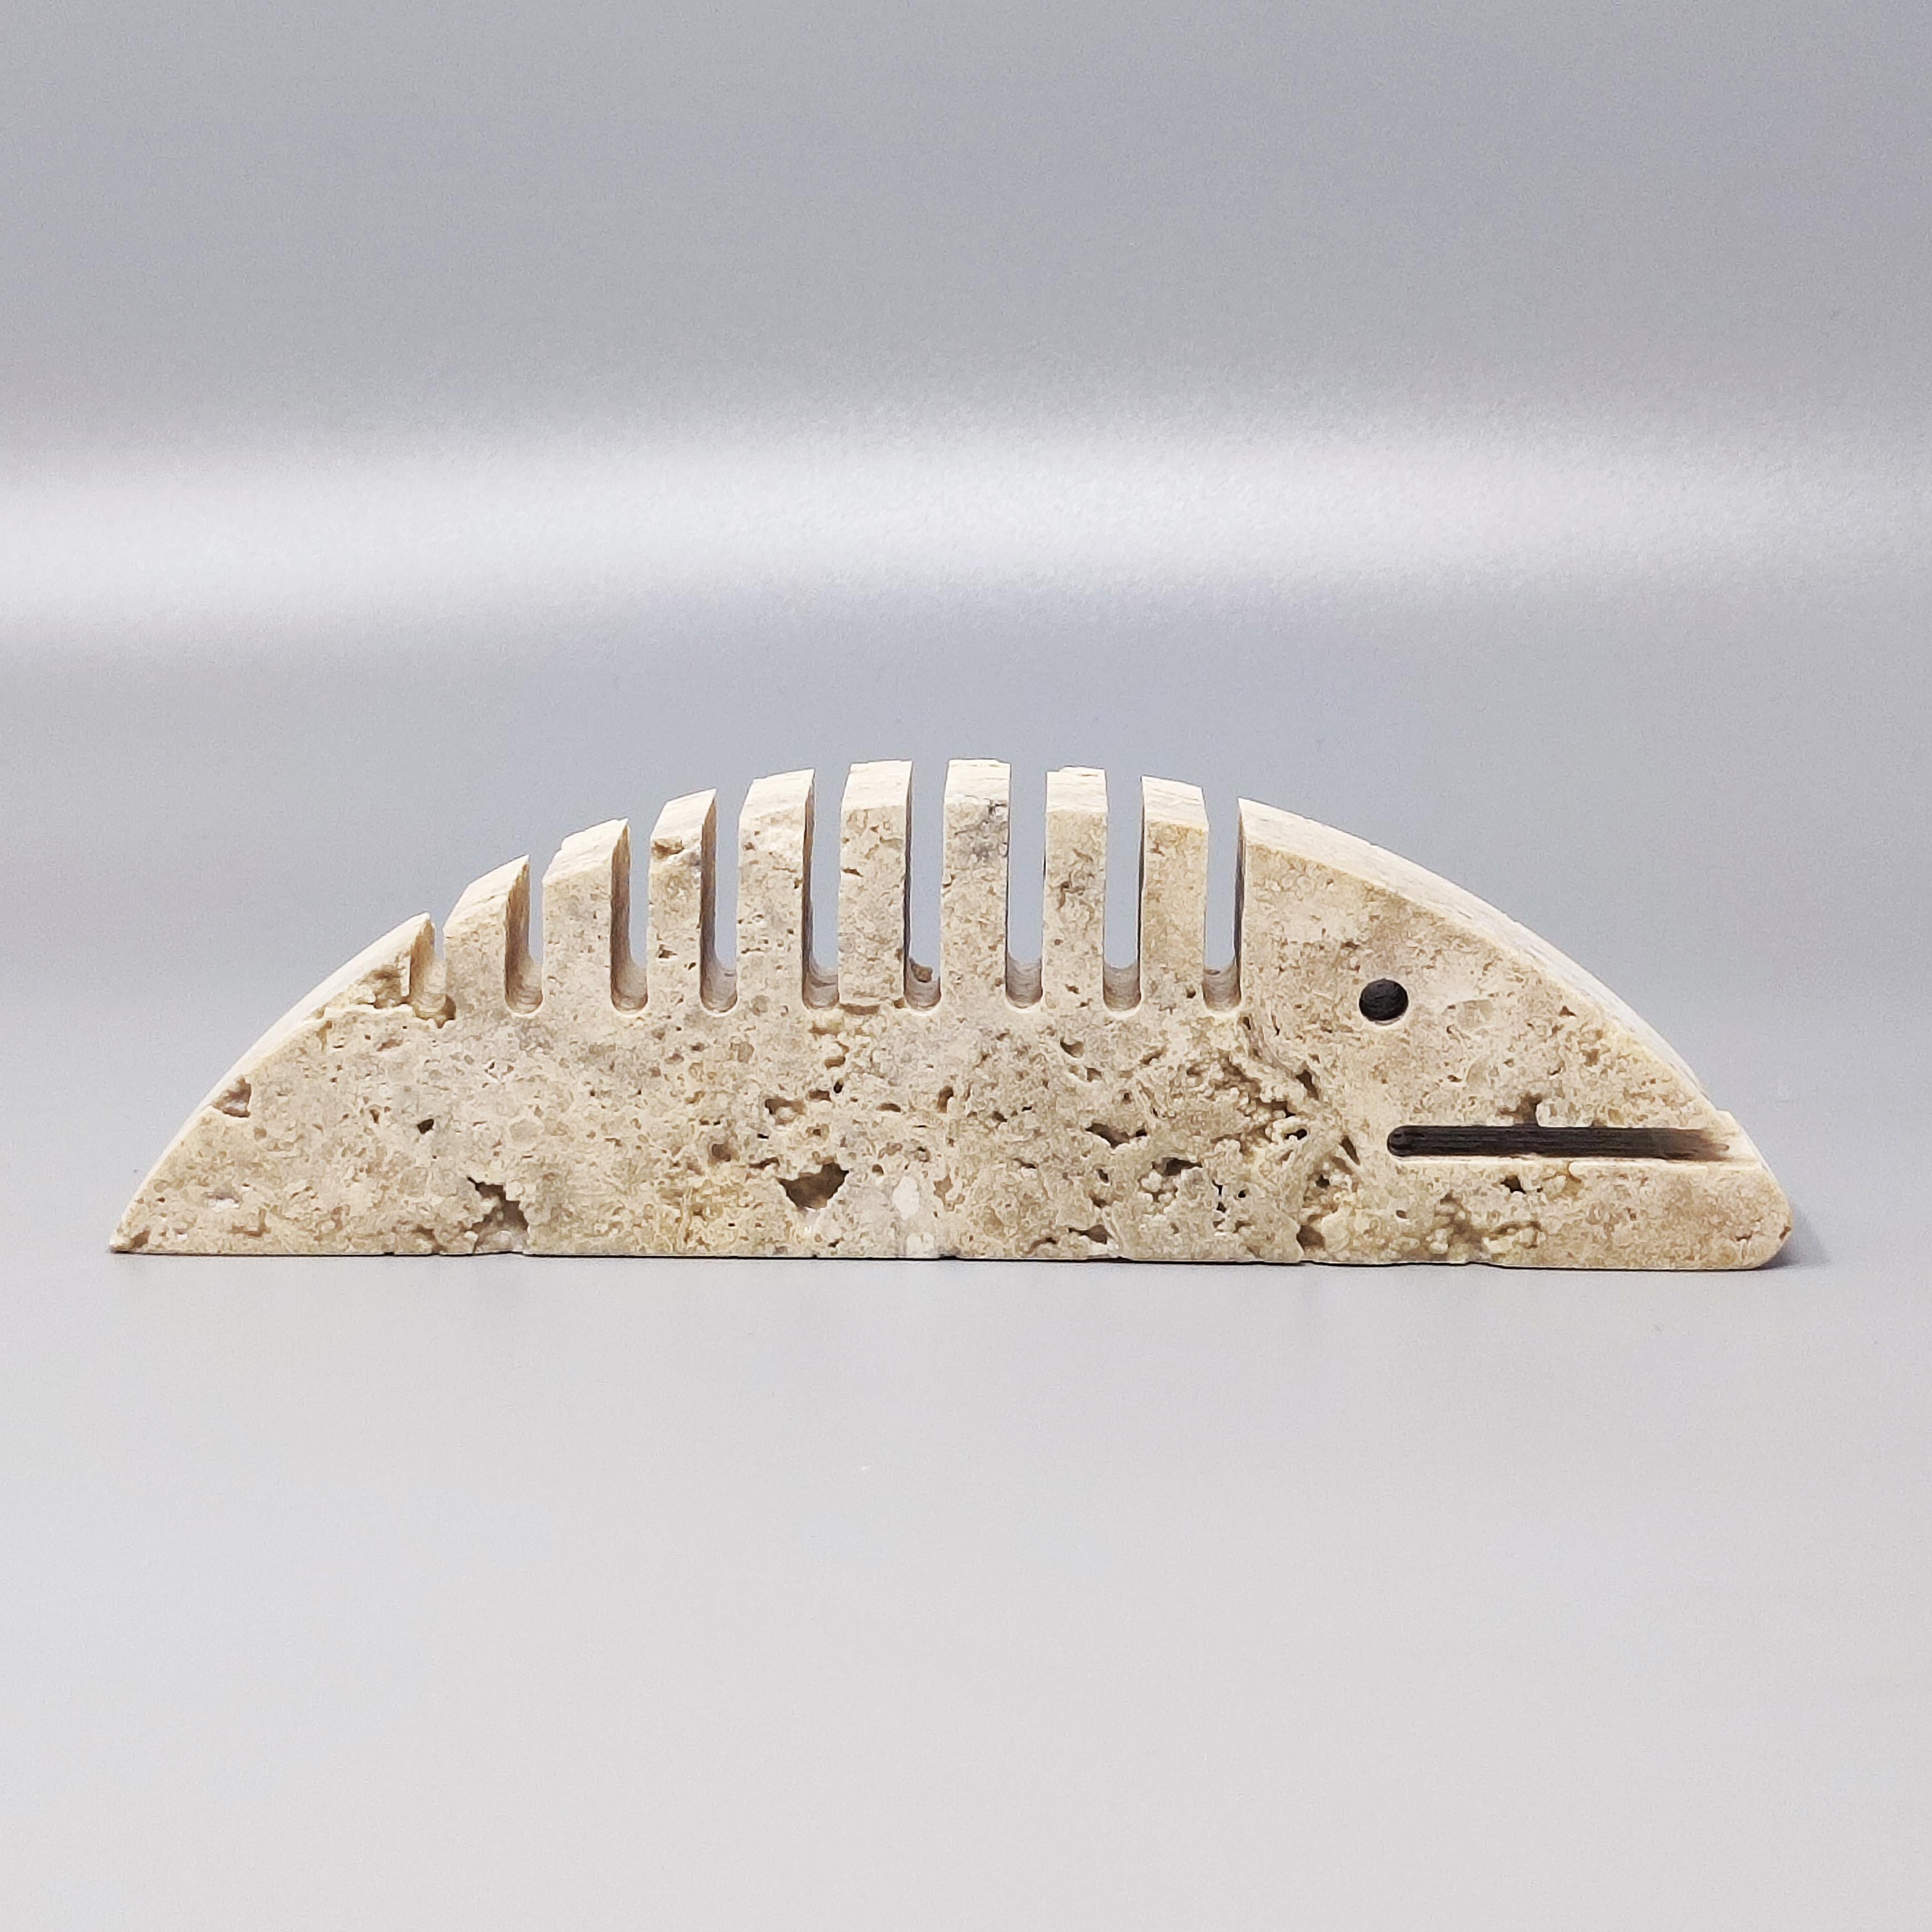 1970s Original big travertine fish sculpture by F.lli Mannelli. The item is in excellent condition. Made in Italy.
Dimension:
8,26 w x 1,18 D x 2,36H inches
L 21 cm x P 3 cm x cm 6 H.